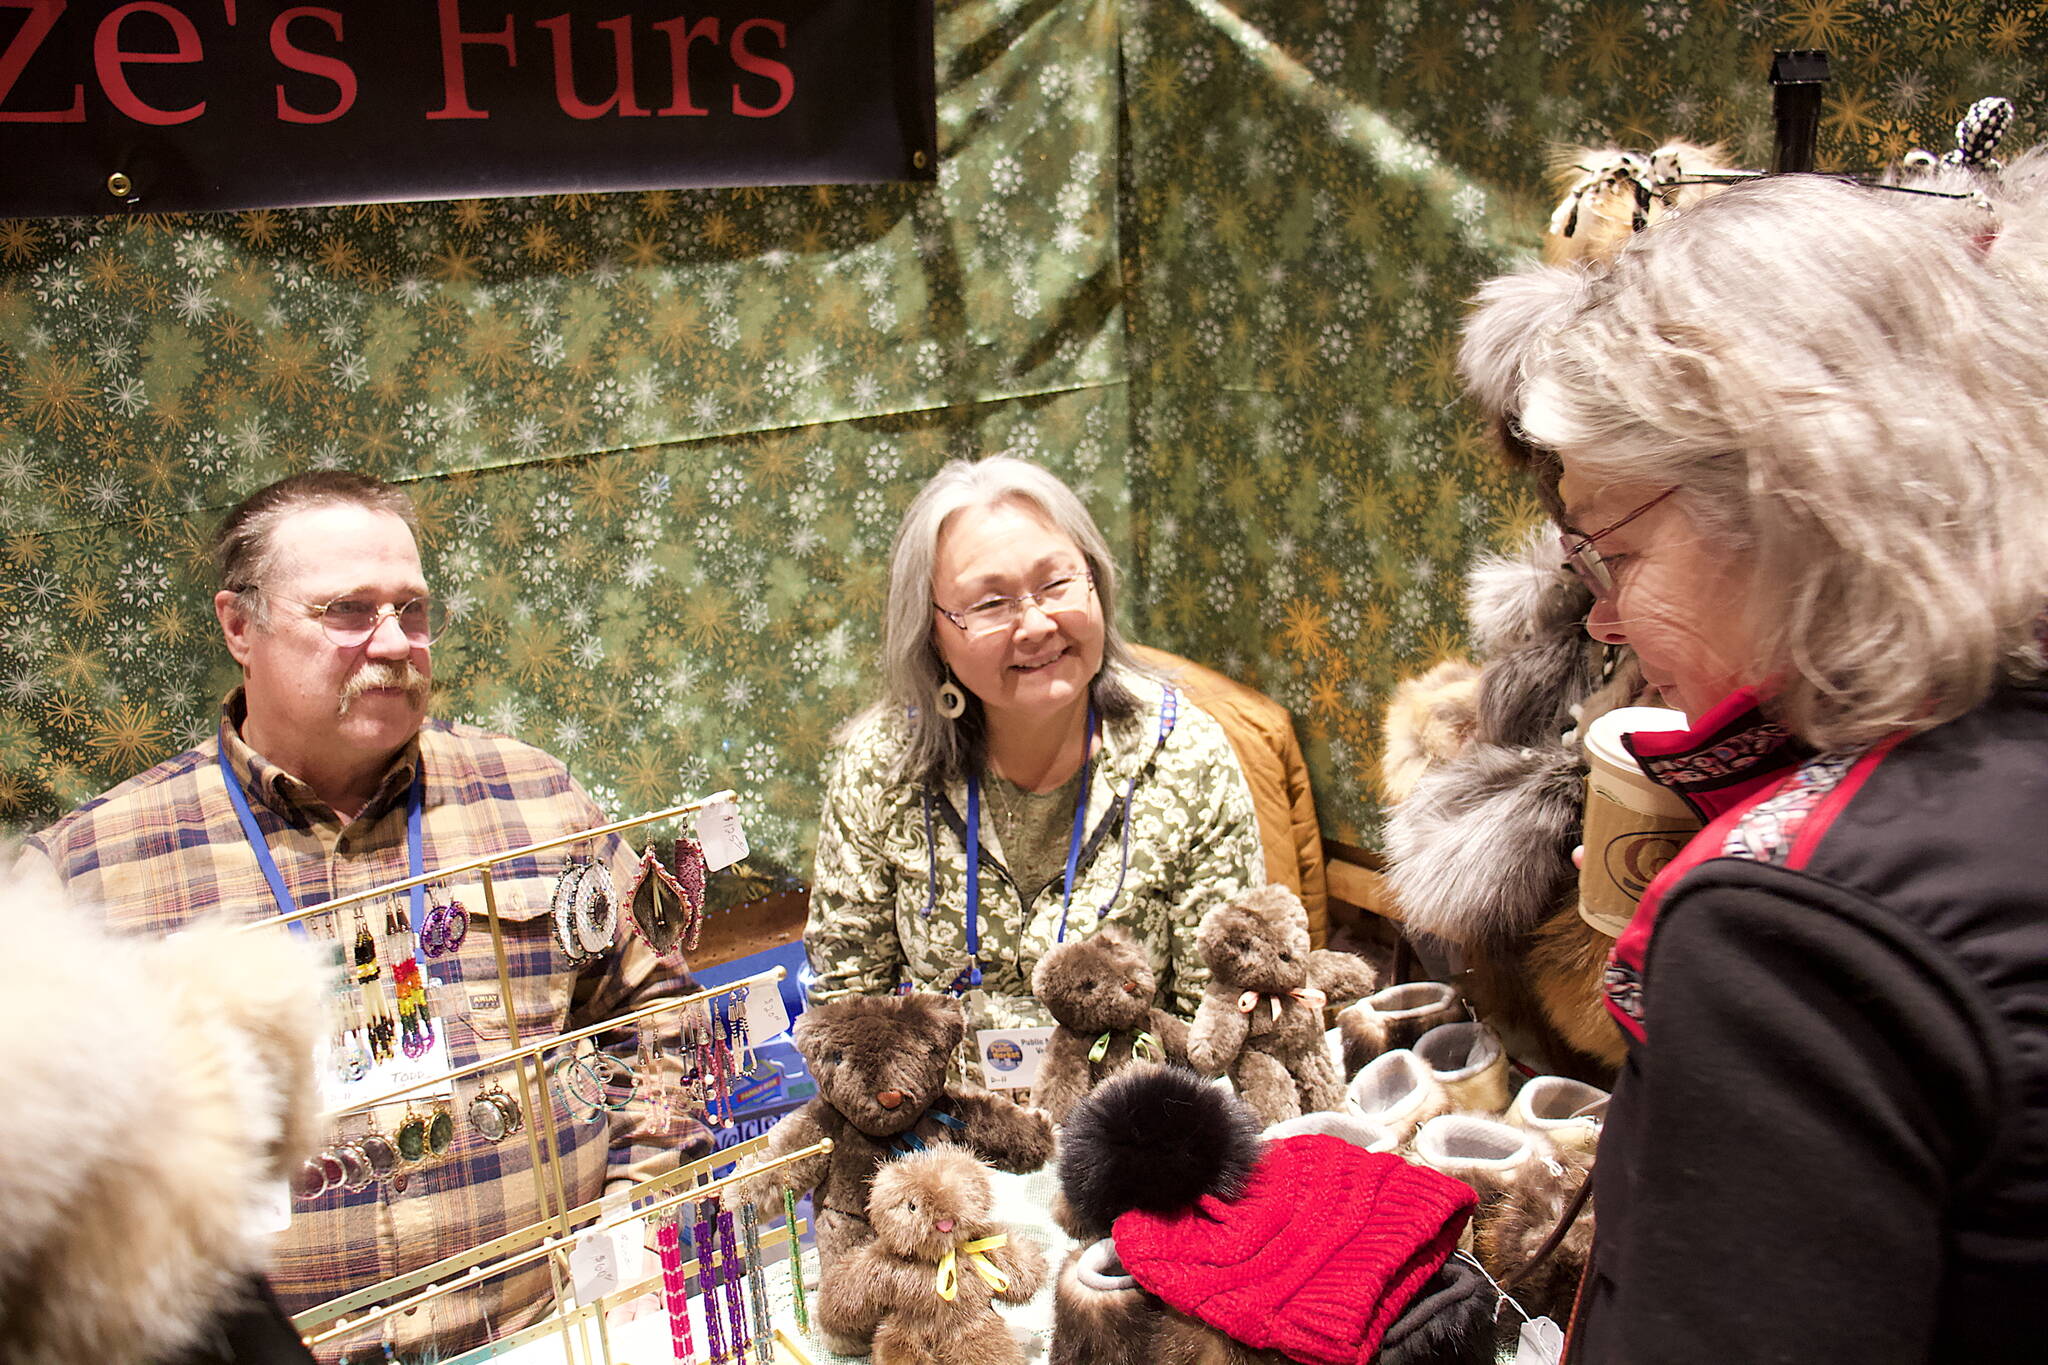 Todd and Annie Fritze (left) talk to Cheryl Benson about fur products sold at the couple’s booth at the Juneau Public Market on Friday at Centennial Hall. The couple travels from Dillingham each year to spend Thanksgiving with family in Juneau sell items made from furs they trap. (Mark Sabbatini / Juneau Empire)